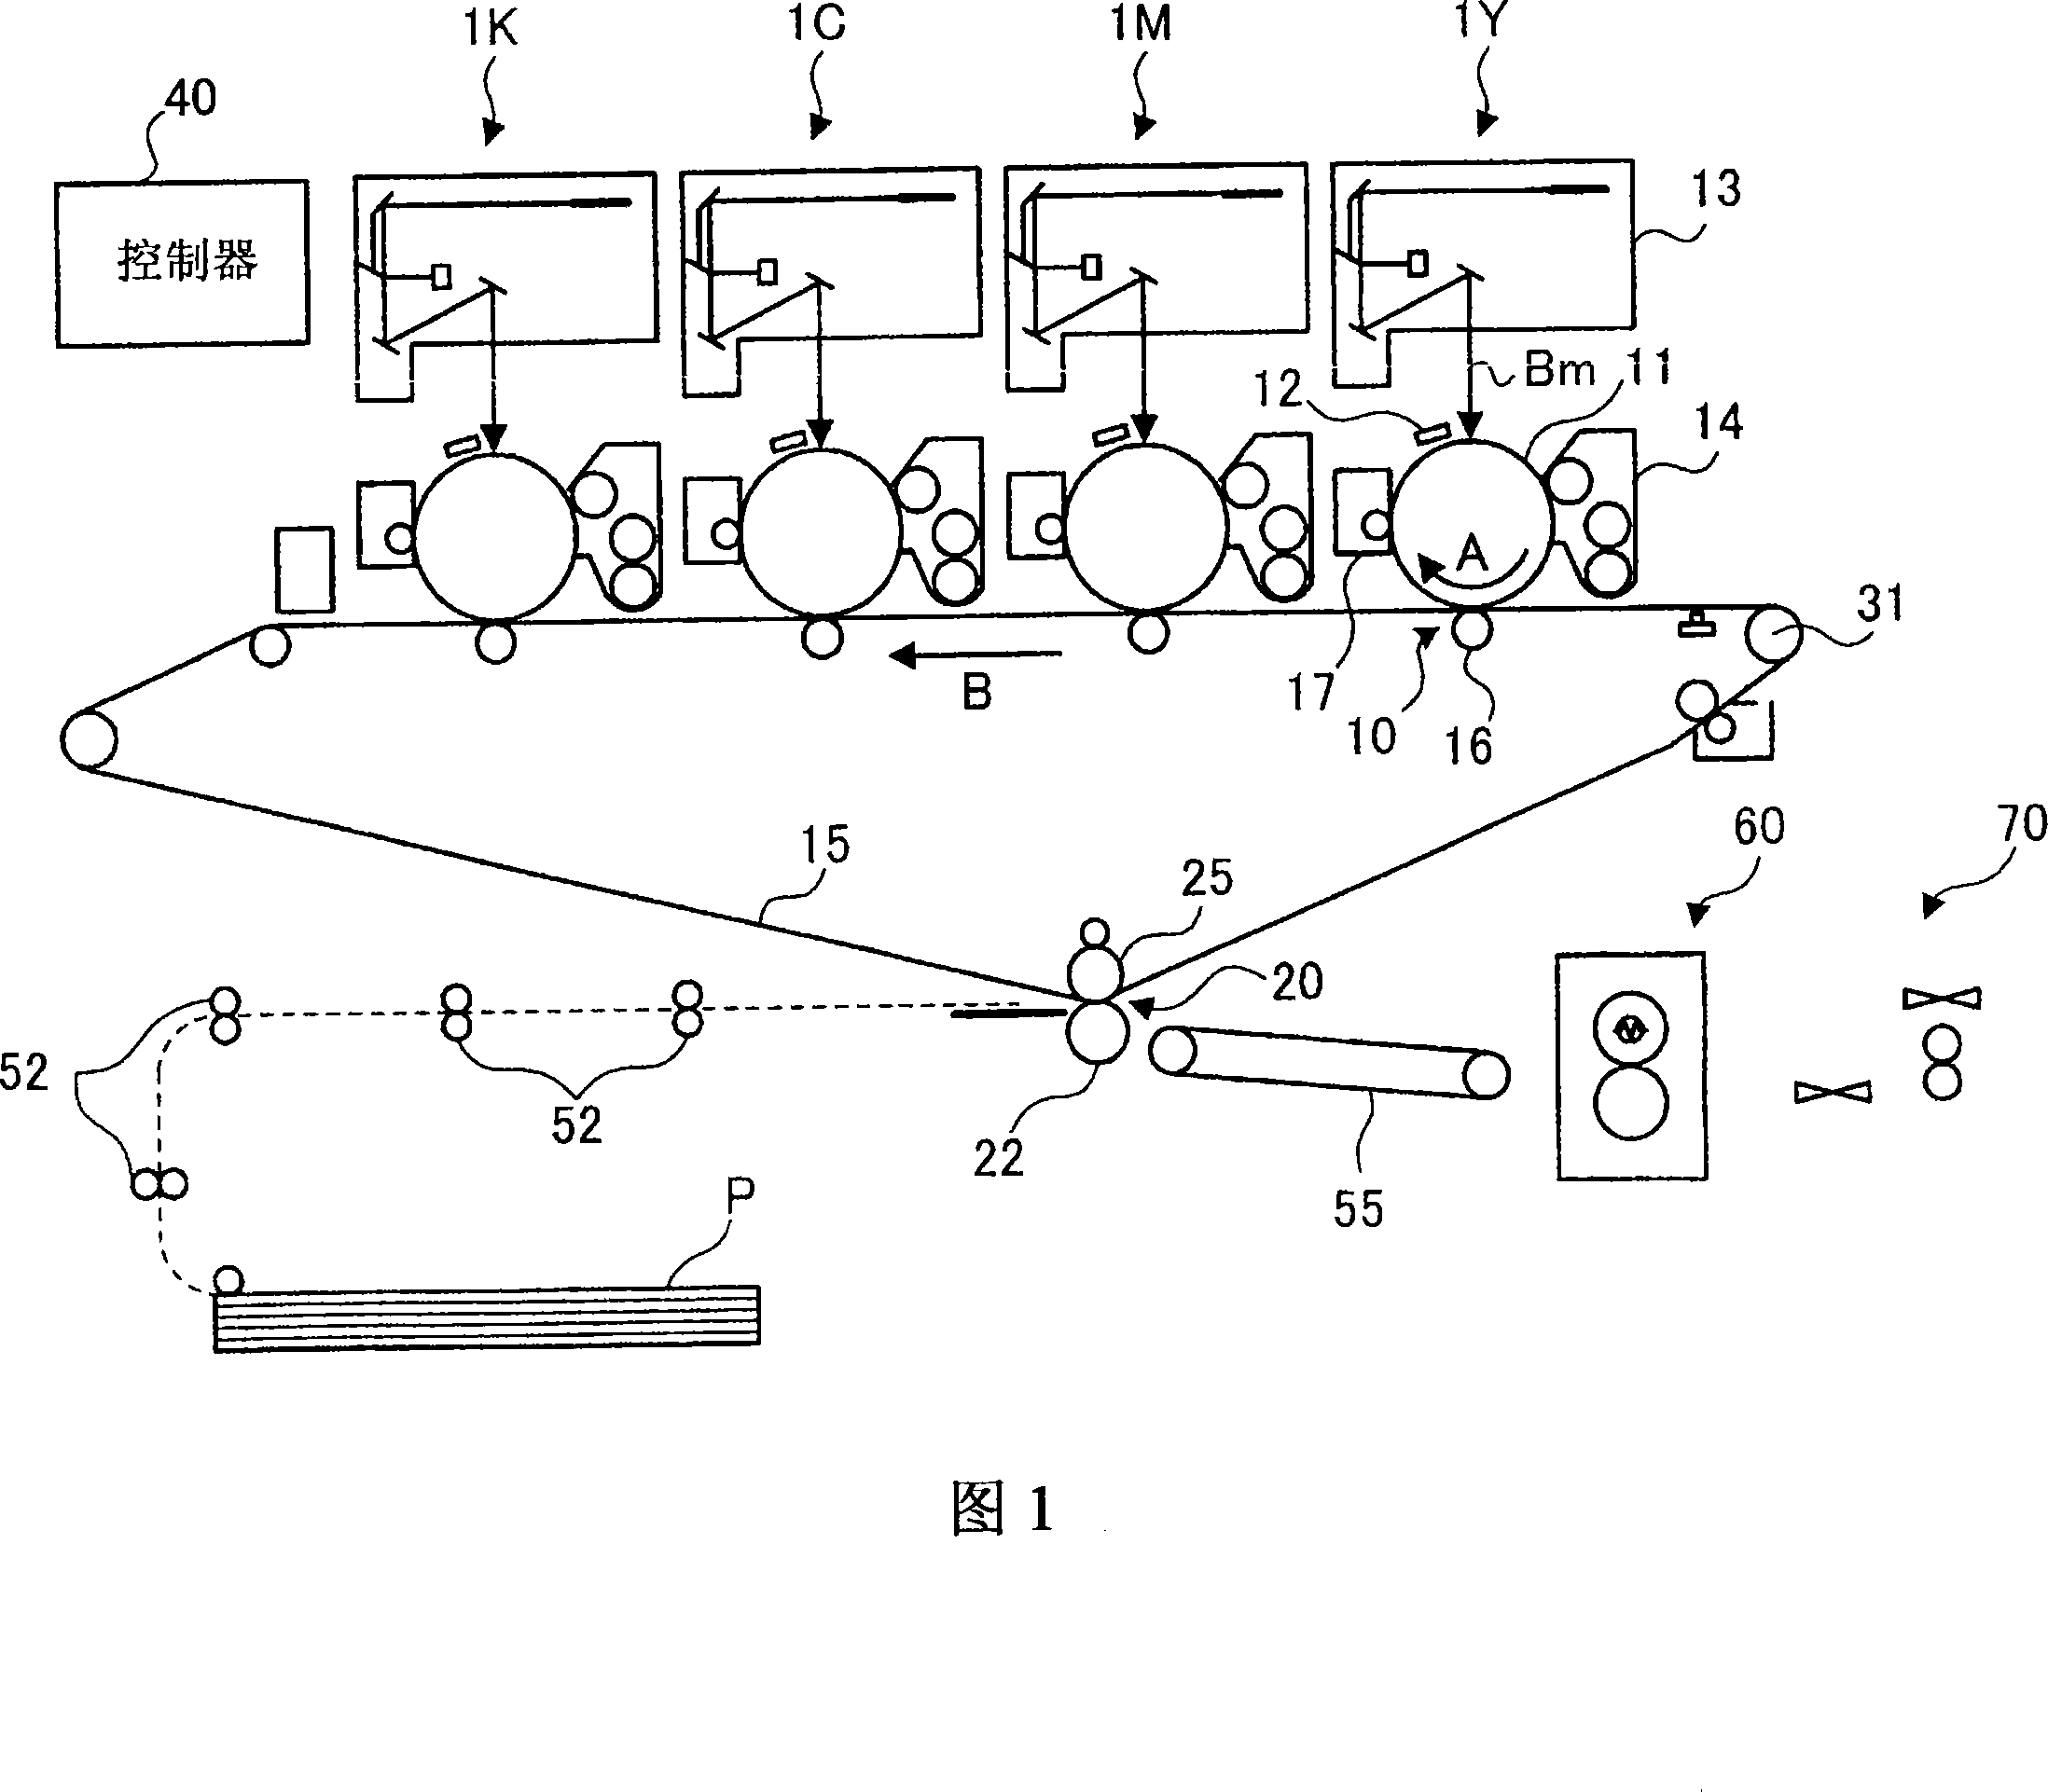 Image forming apparatus and method of cooling recording material